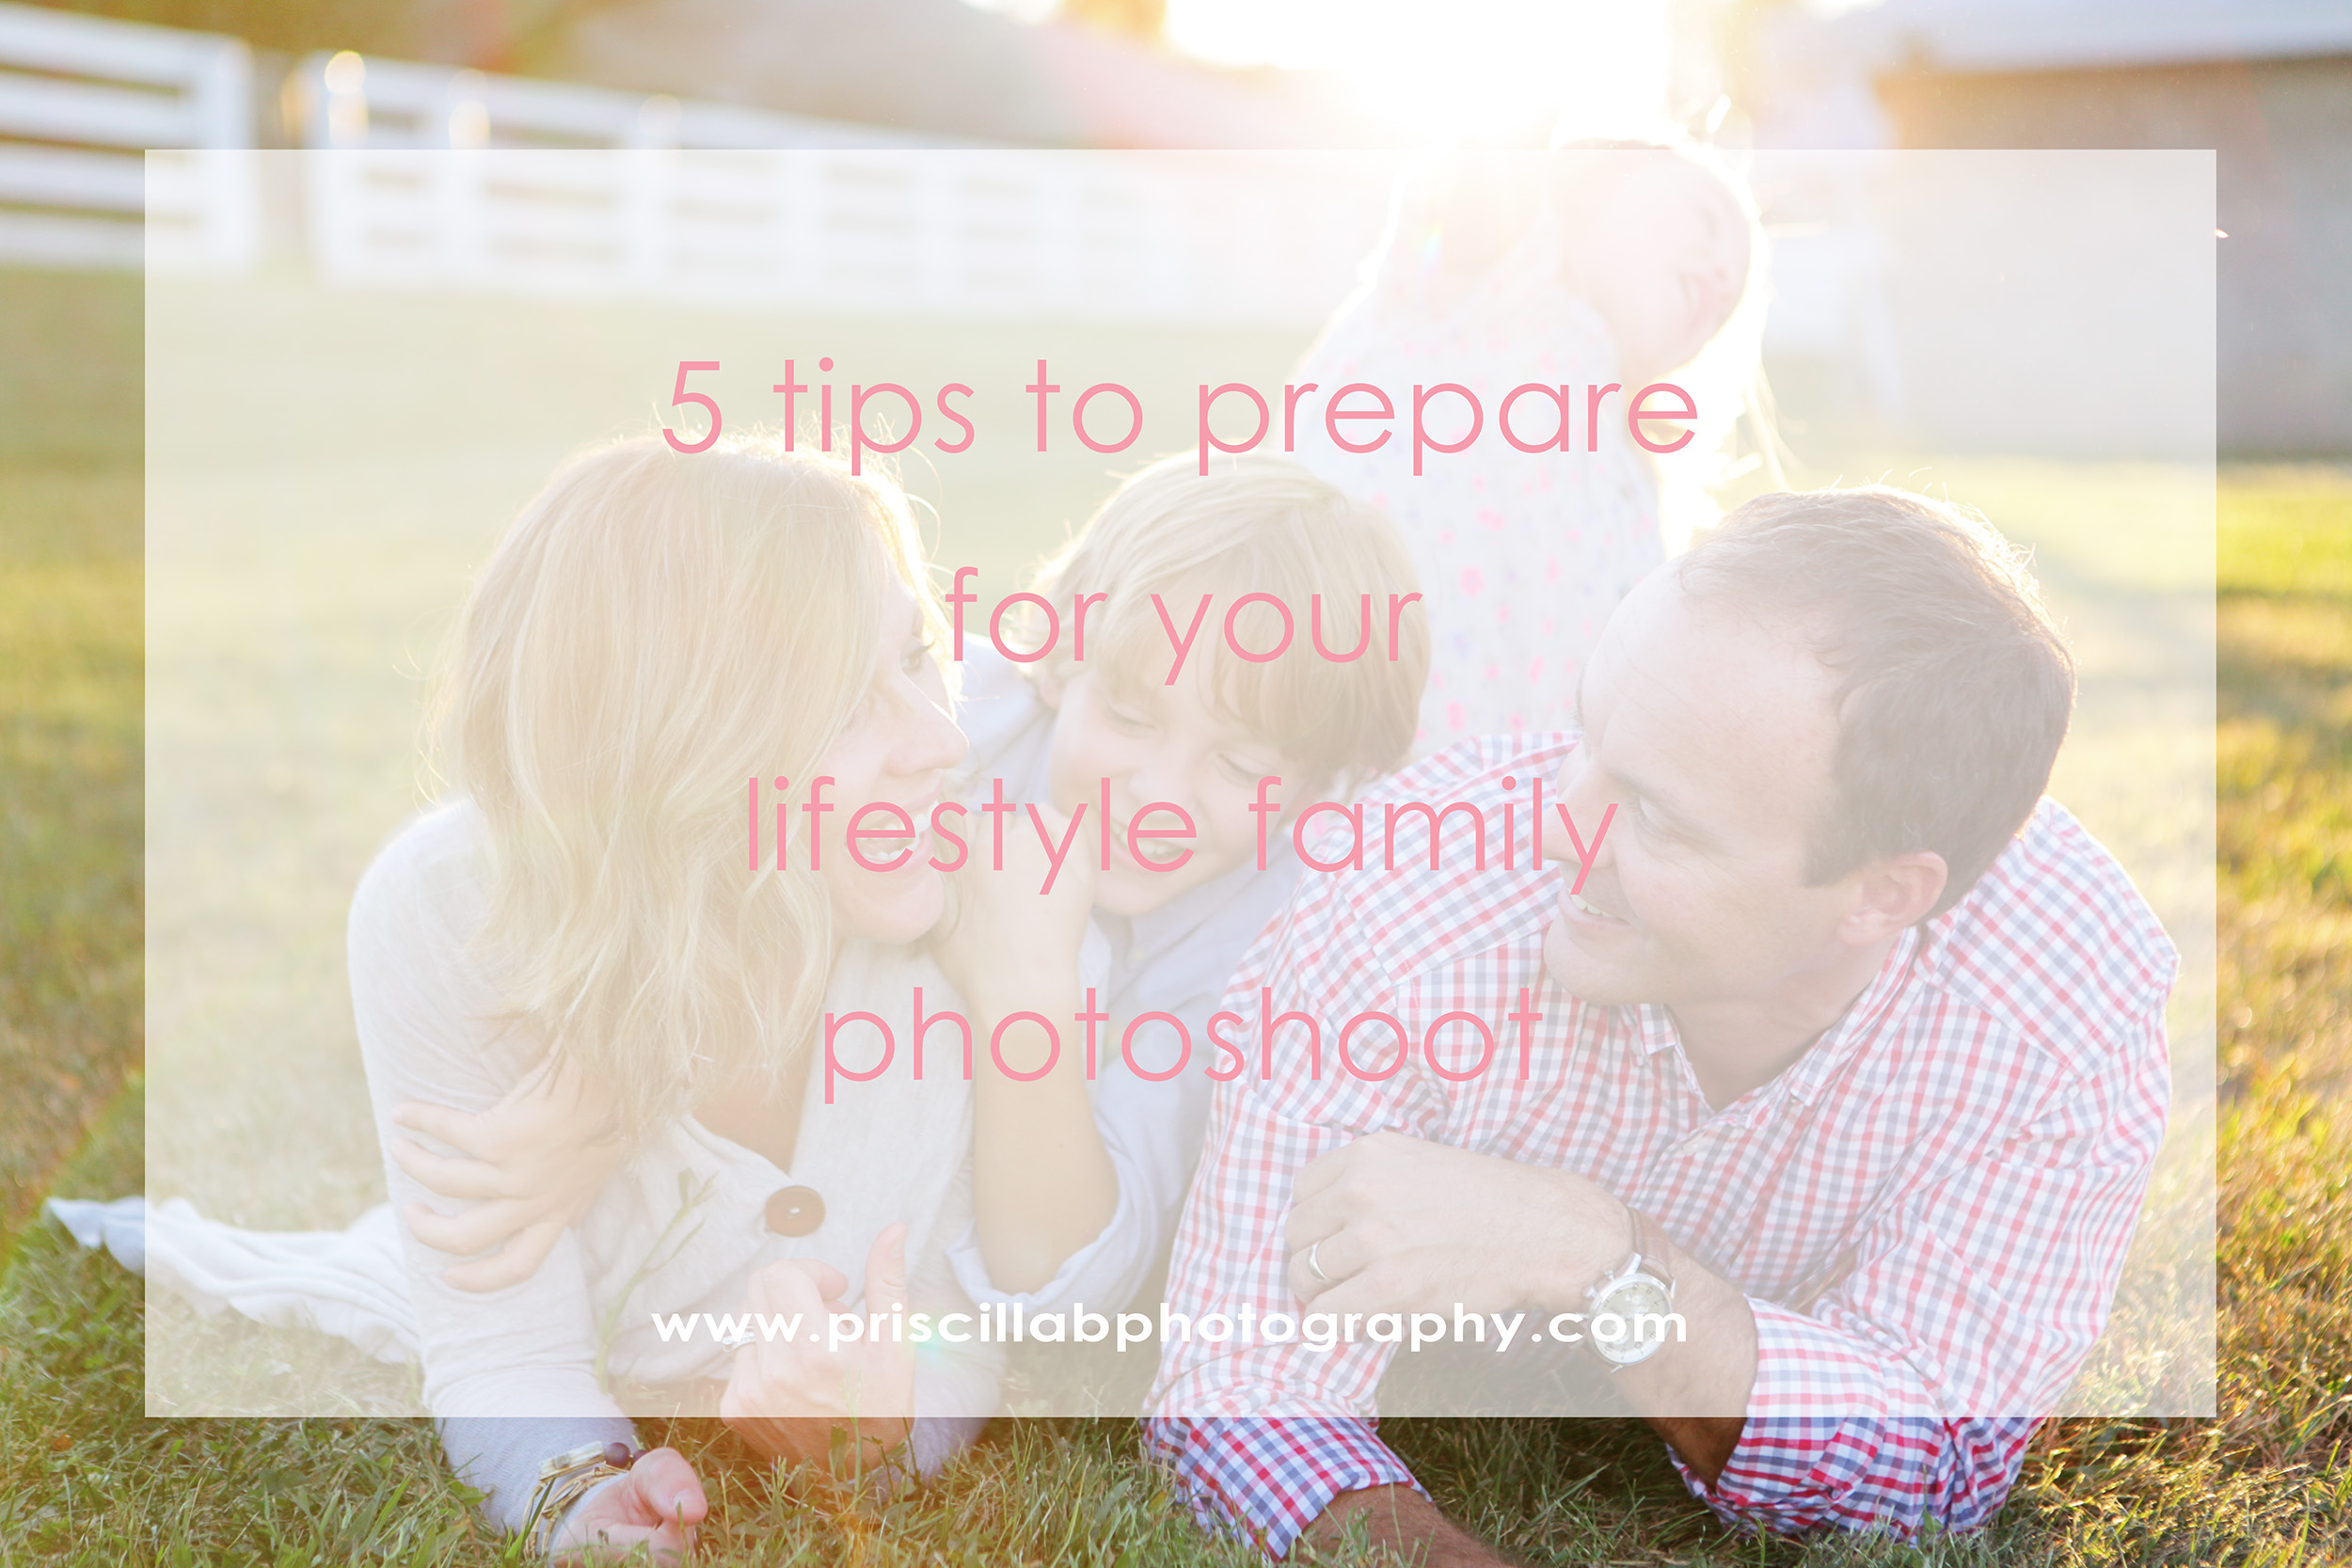 five-tips-to-prepare-for-your-lifestyle-family-photoshoot.jpg